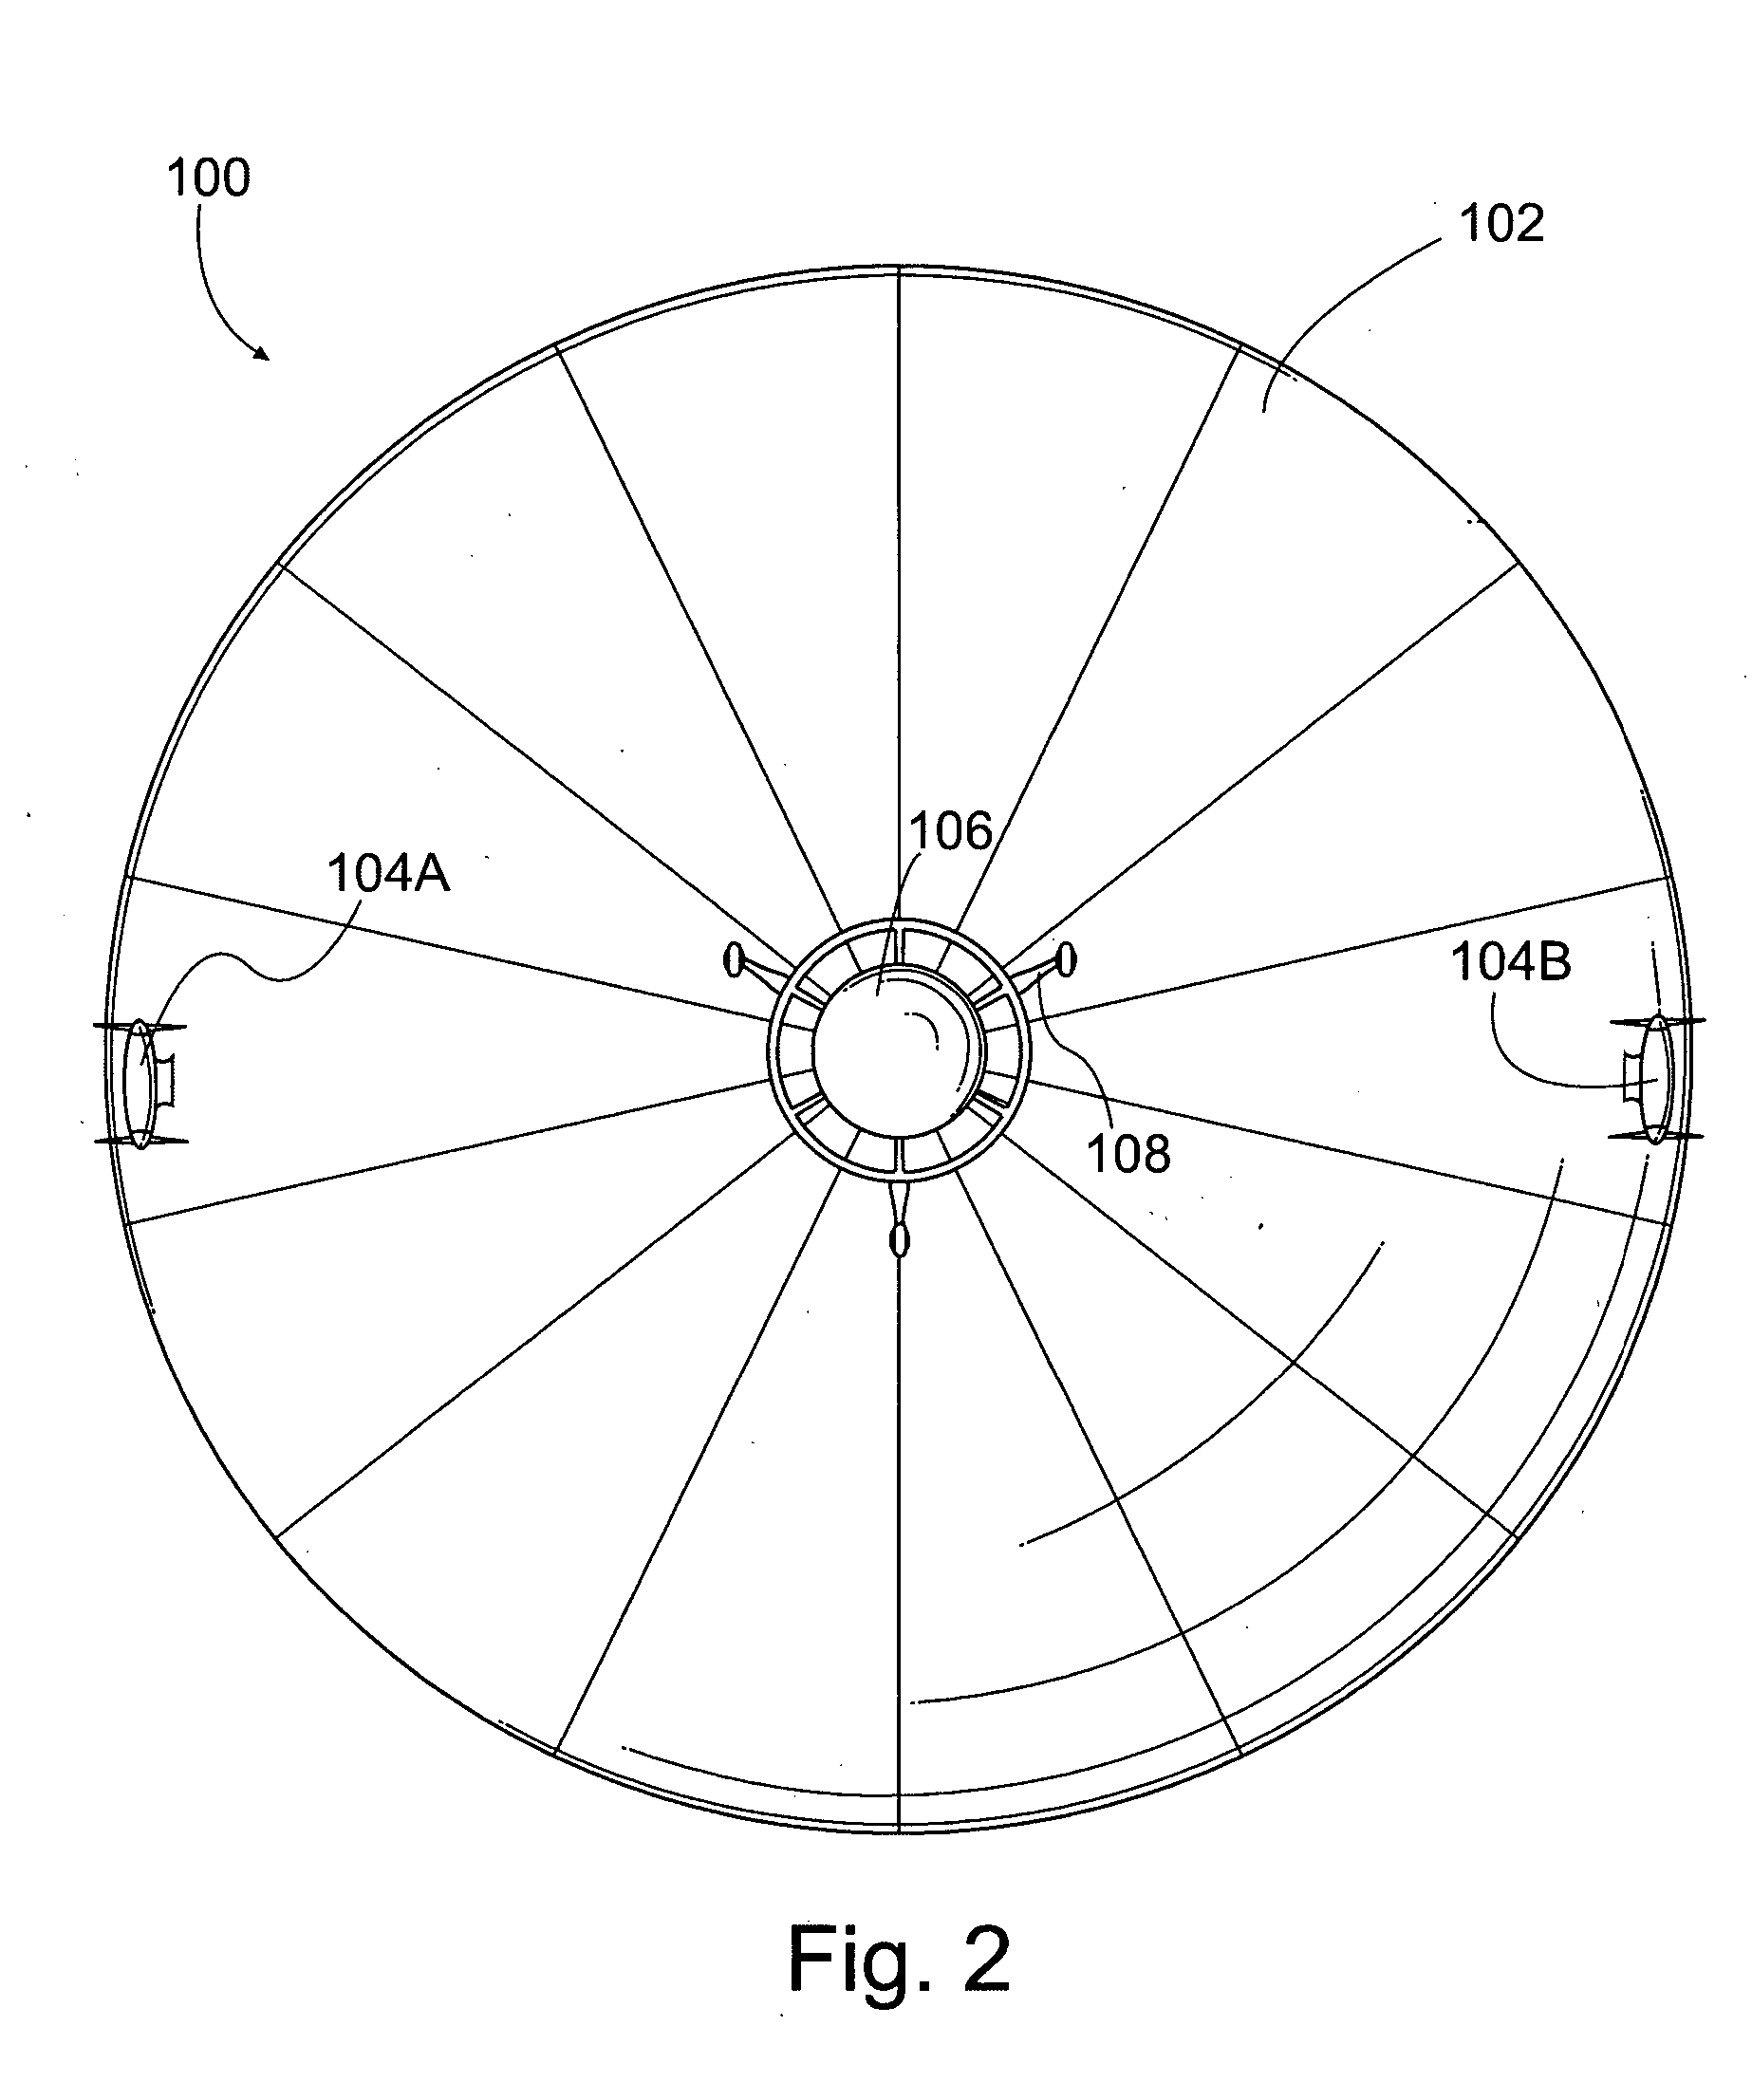 Systems for actively controlling the aerostatic lift of an airship